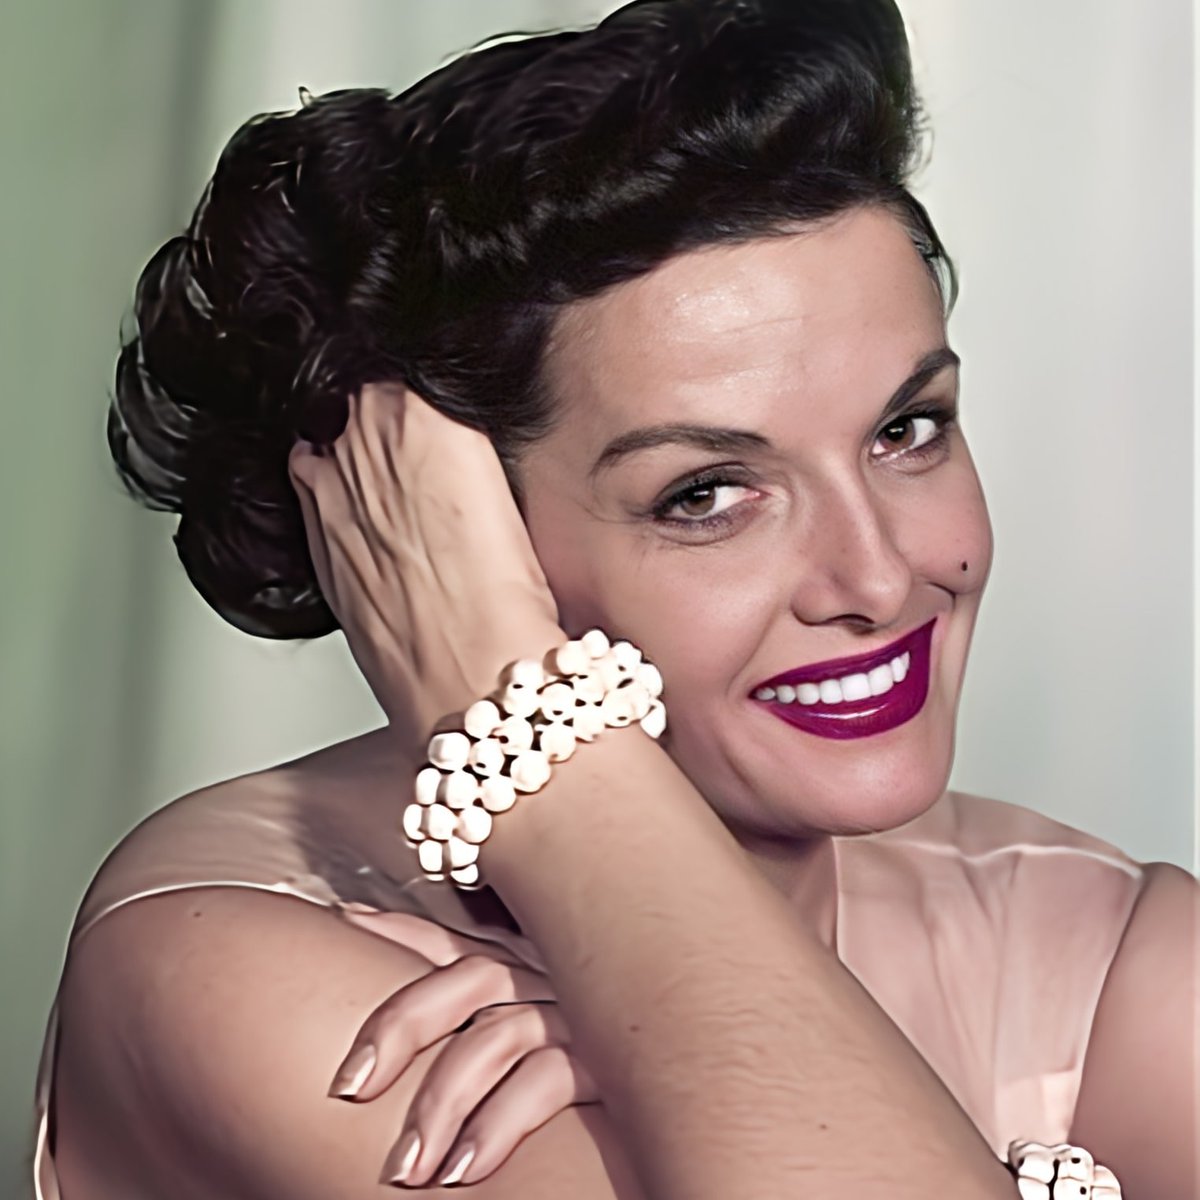 Jane Russell in 1964